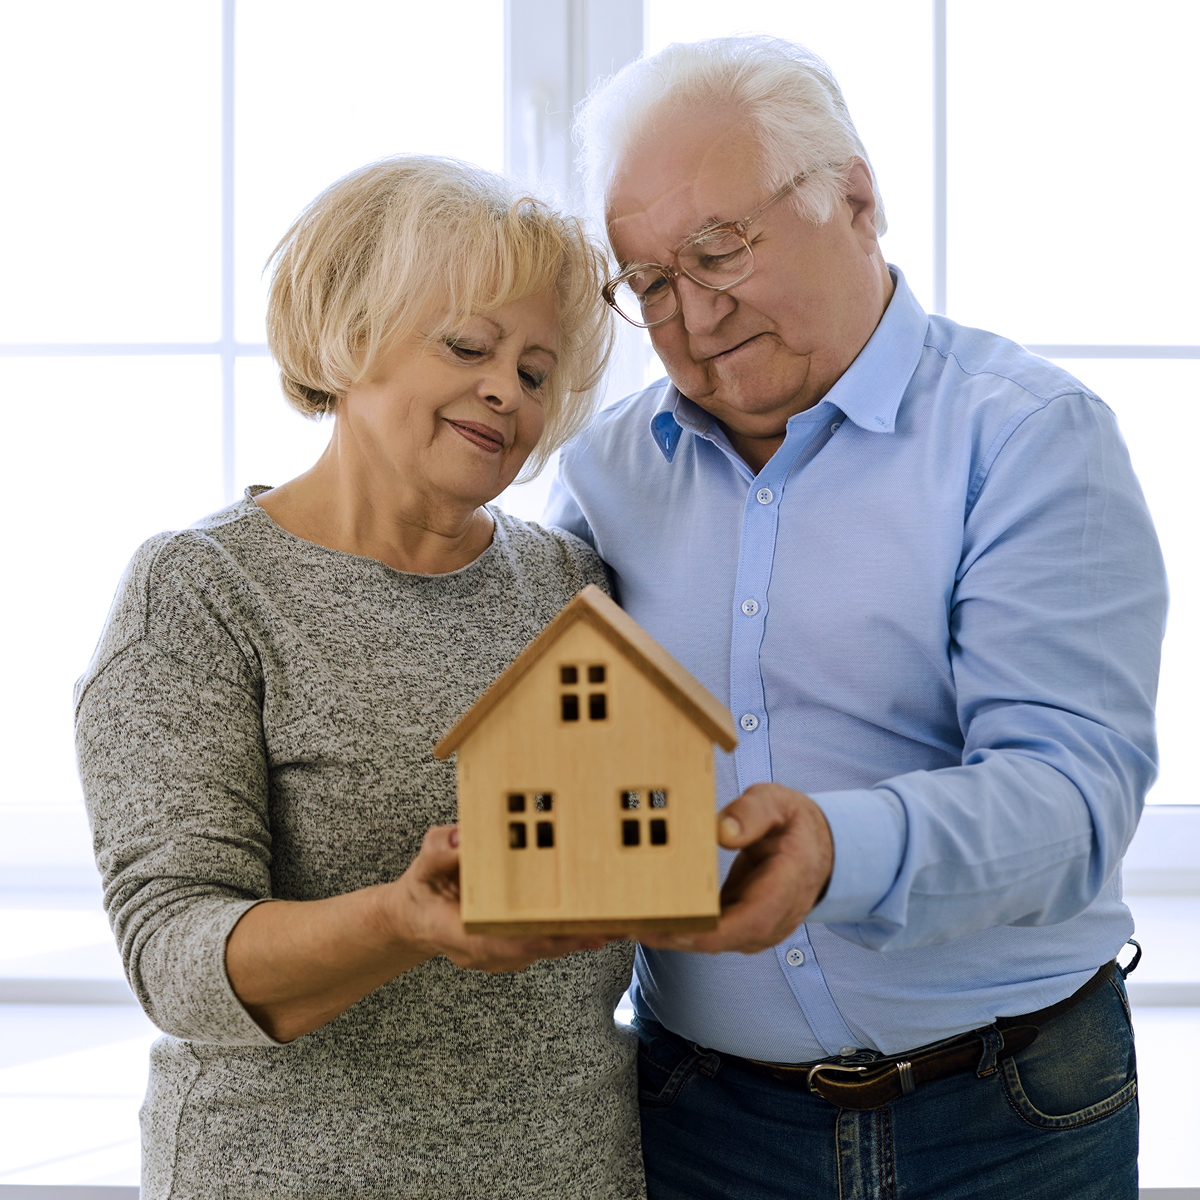 Smiling senior couple looking at a wooden model of a house being held in their hands